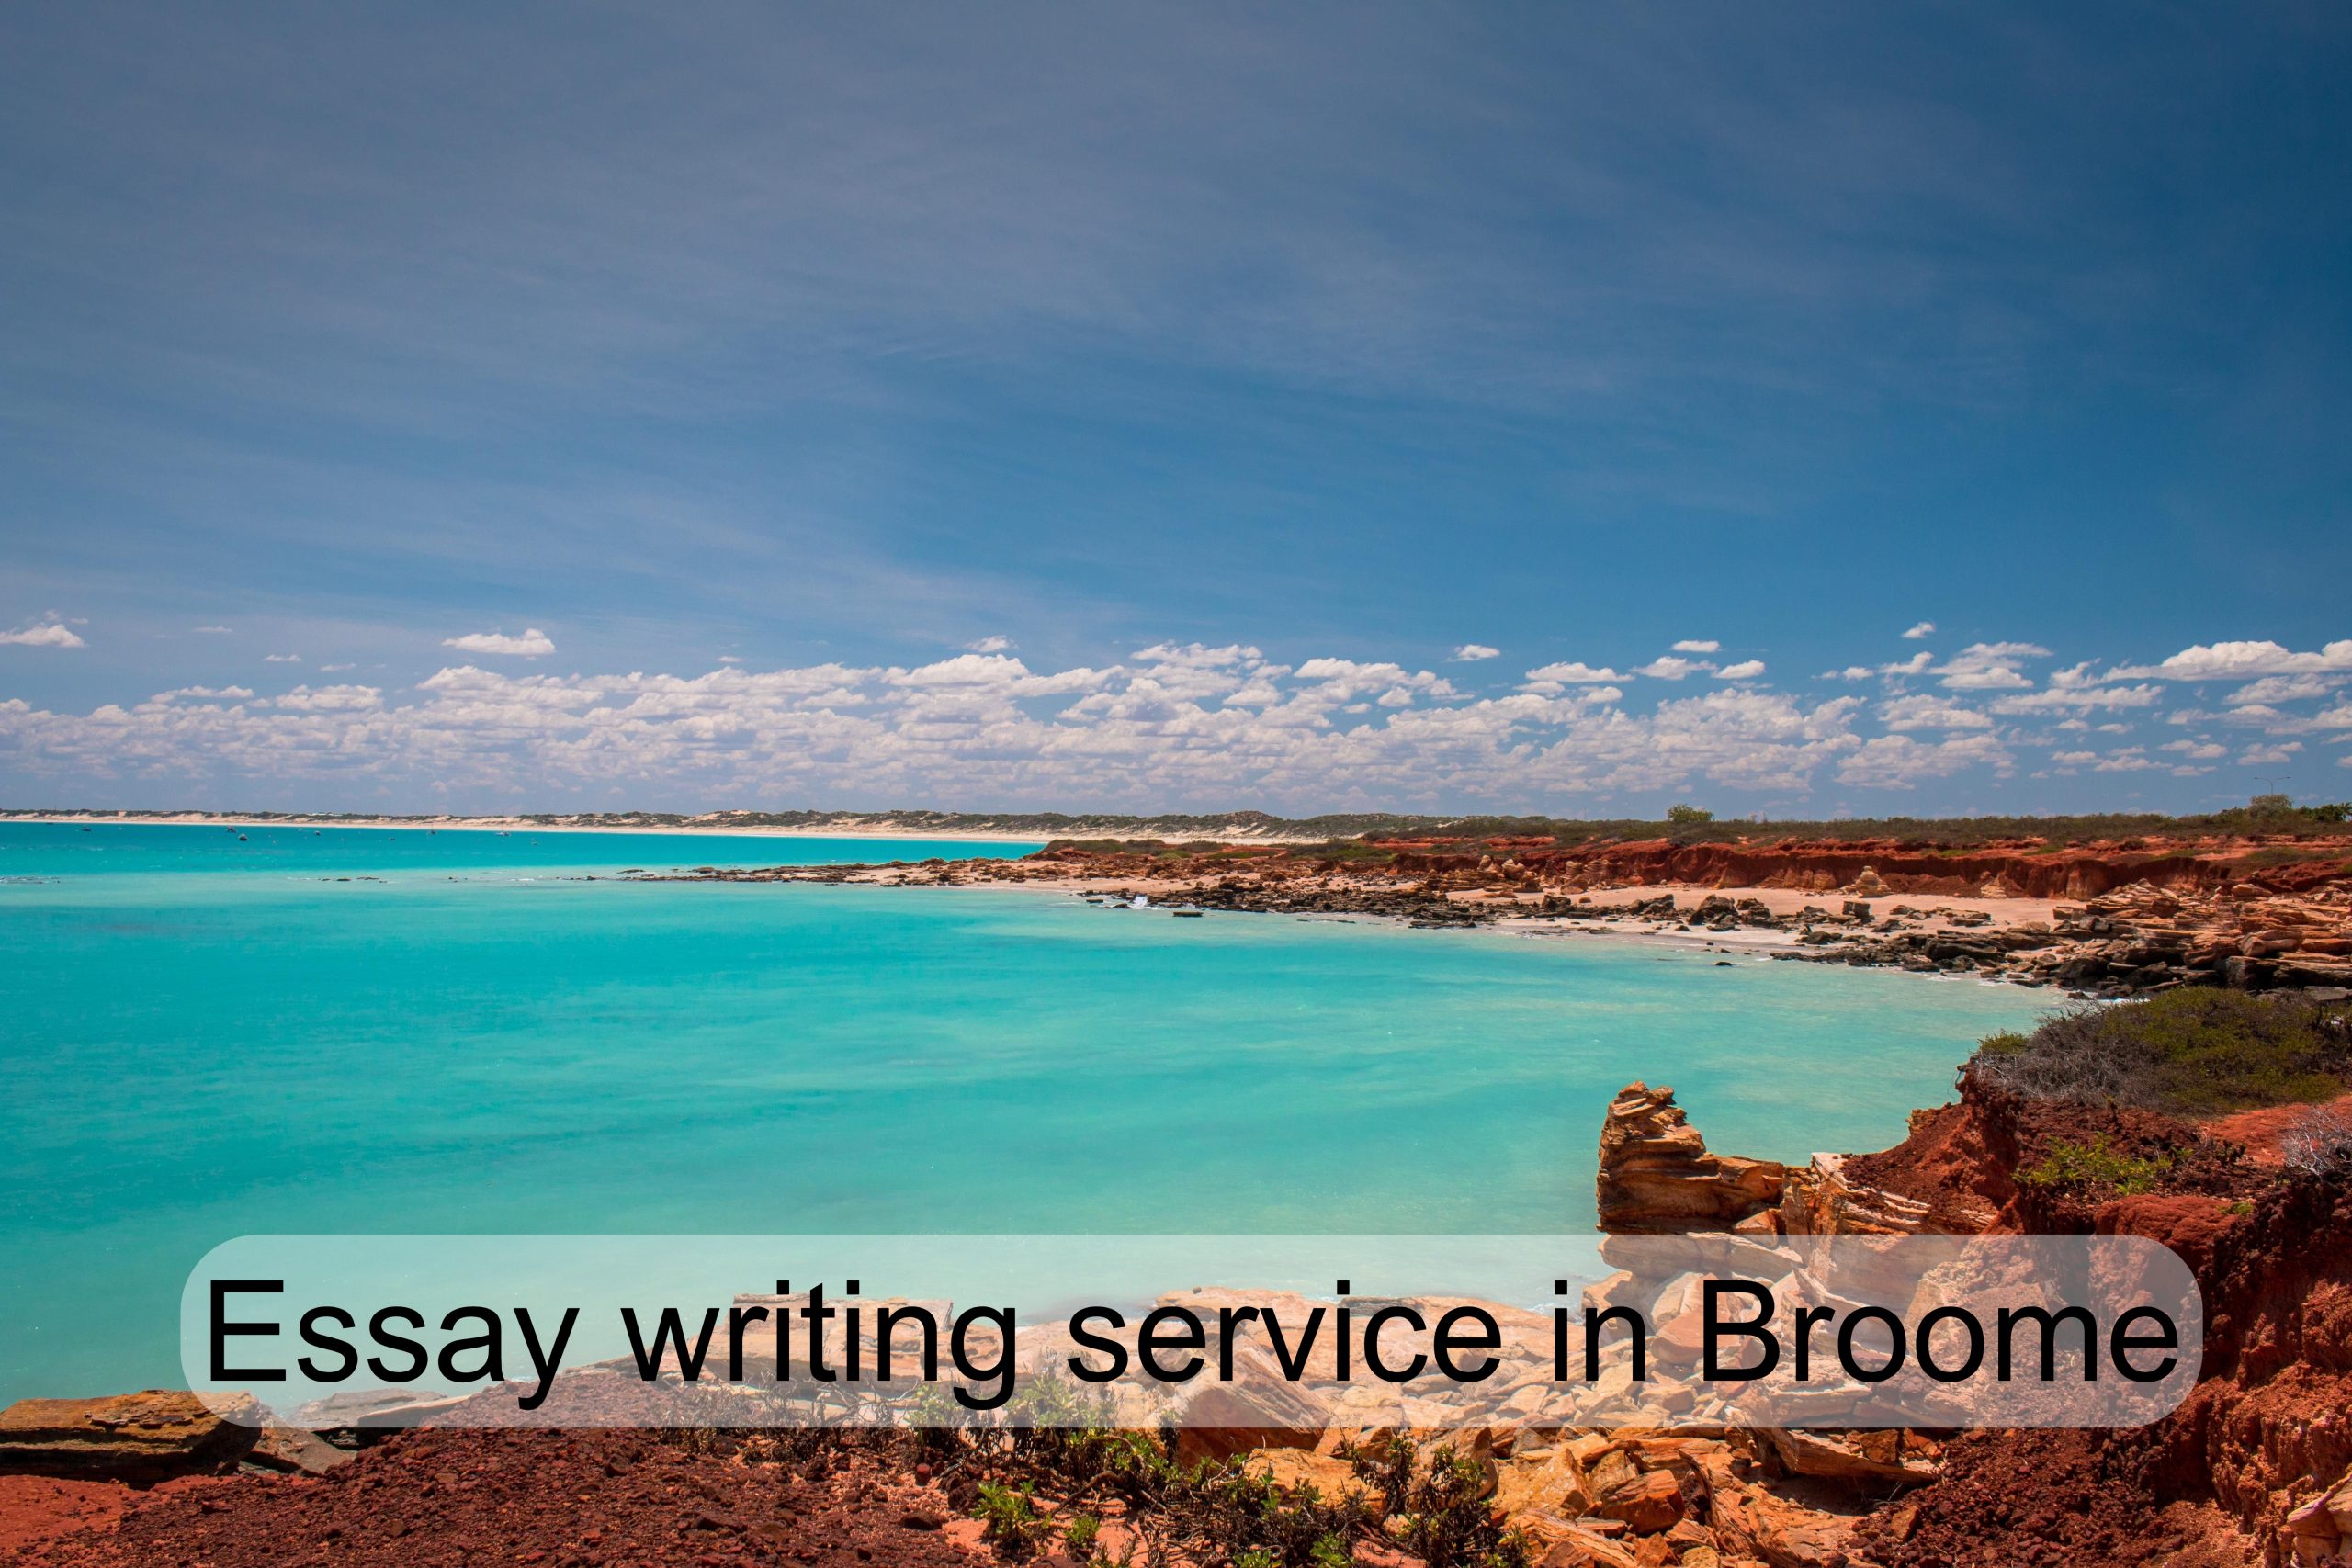 Essay writing service in Broome